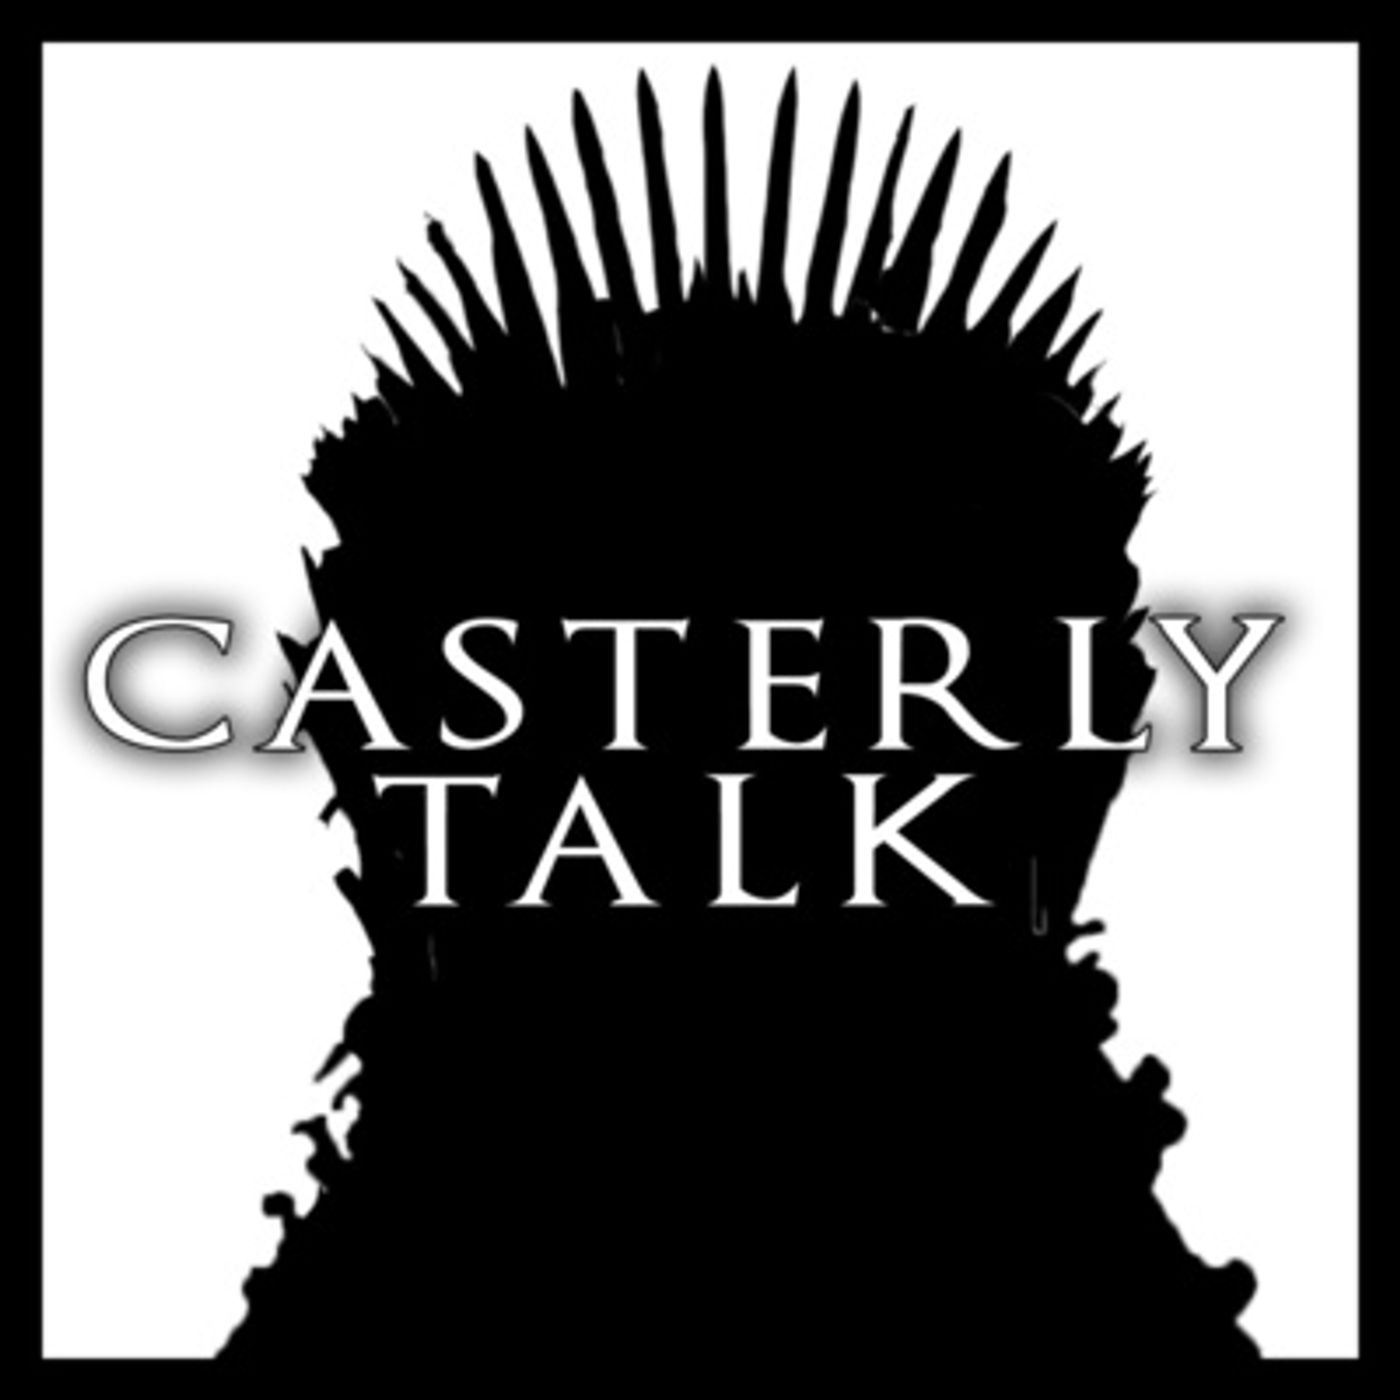 THE CLIMB - Game of Thrones - Rewatch - Casterly Talk EP 105